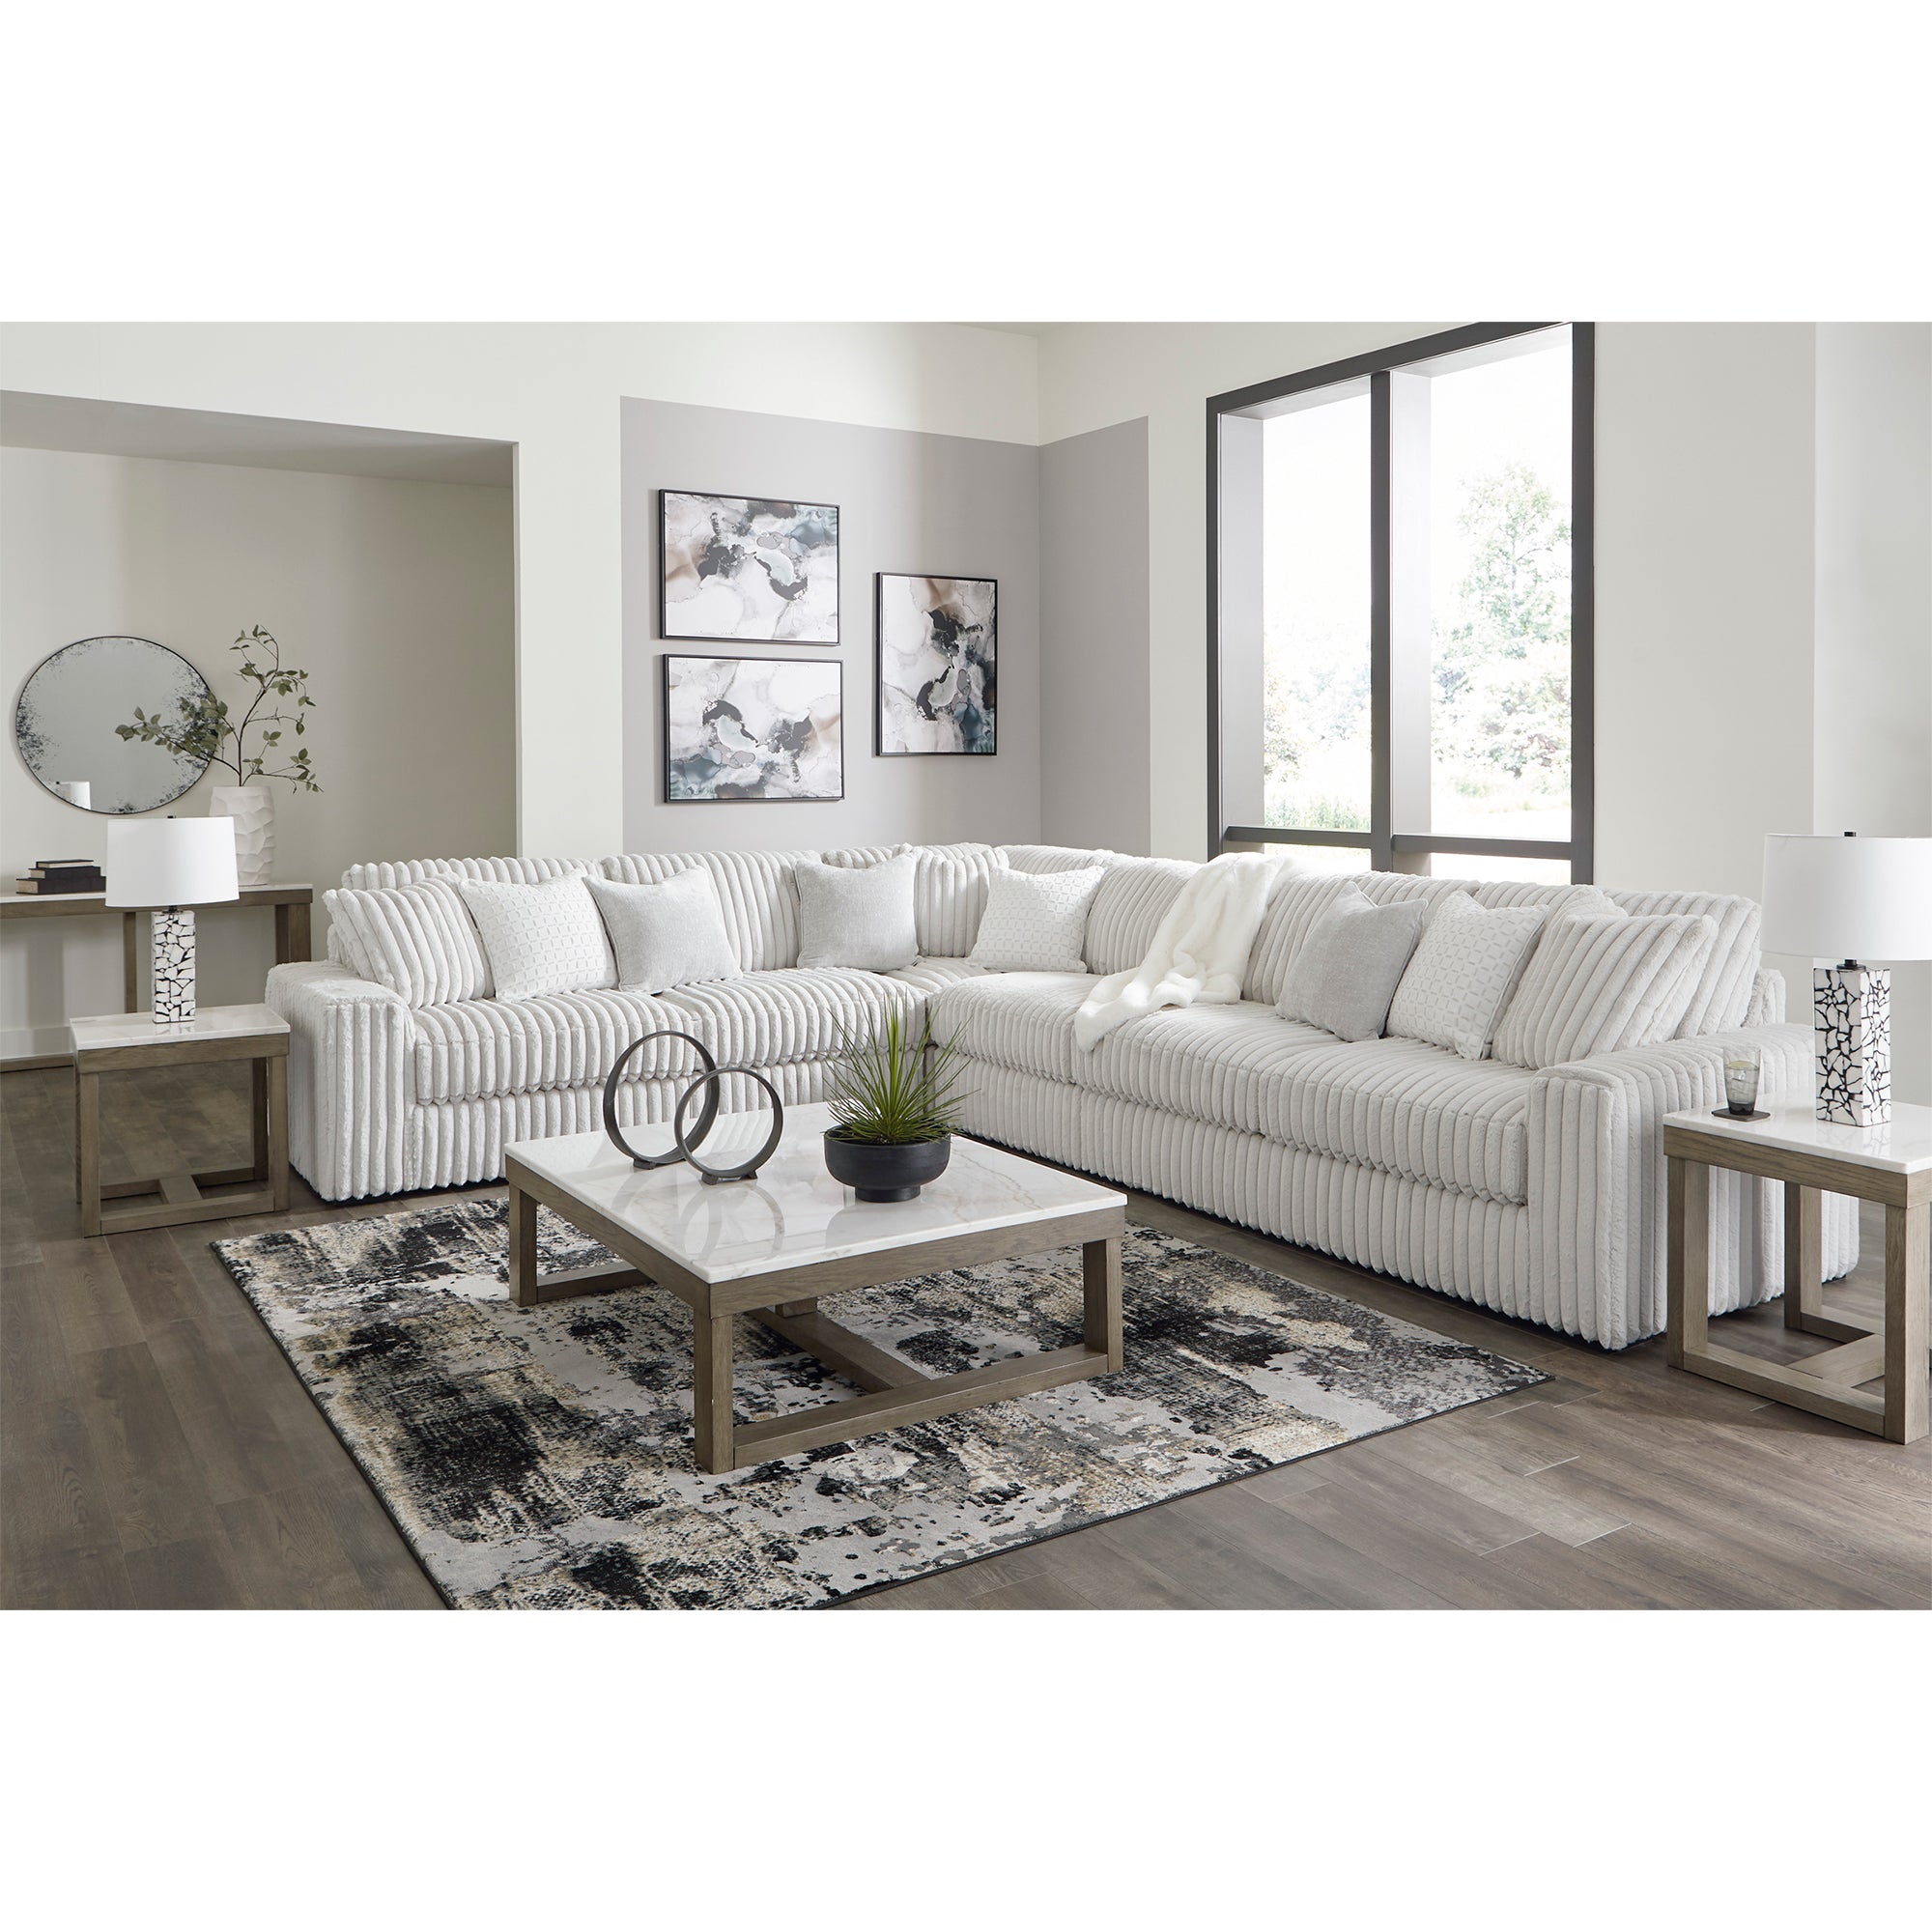 Versatile Stupendous 4-Piece Sectional with elegant design and deep sink-in cushions, offers a luxurious lounging experience for any modern home